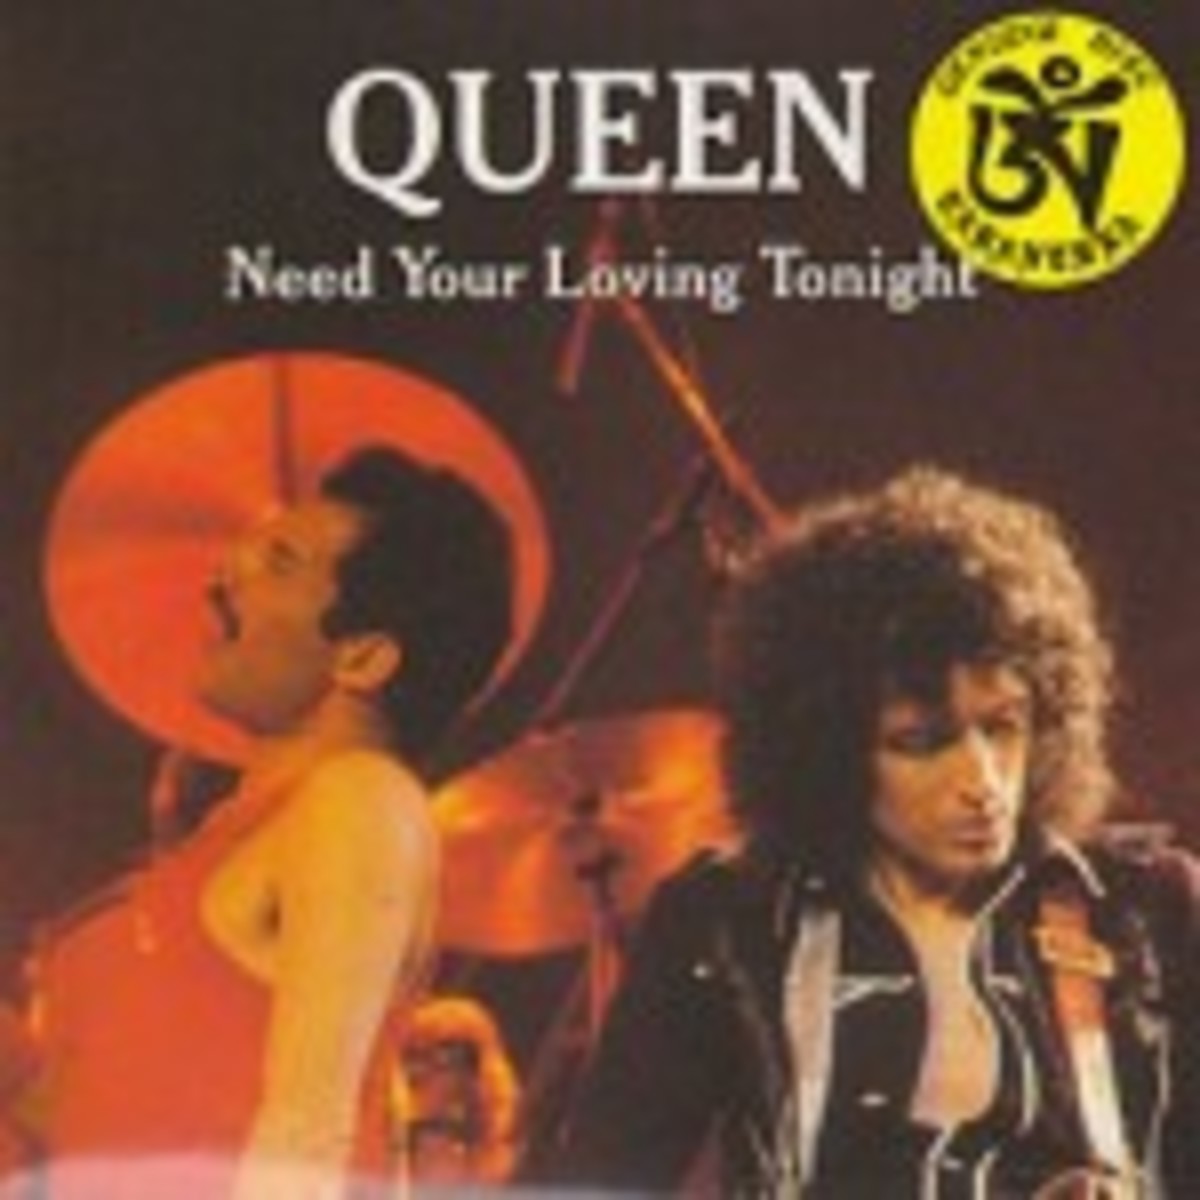 Need_Your_Loving_Tonight_-_QUEEN_-_1980